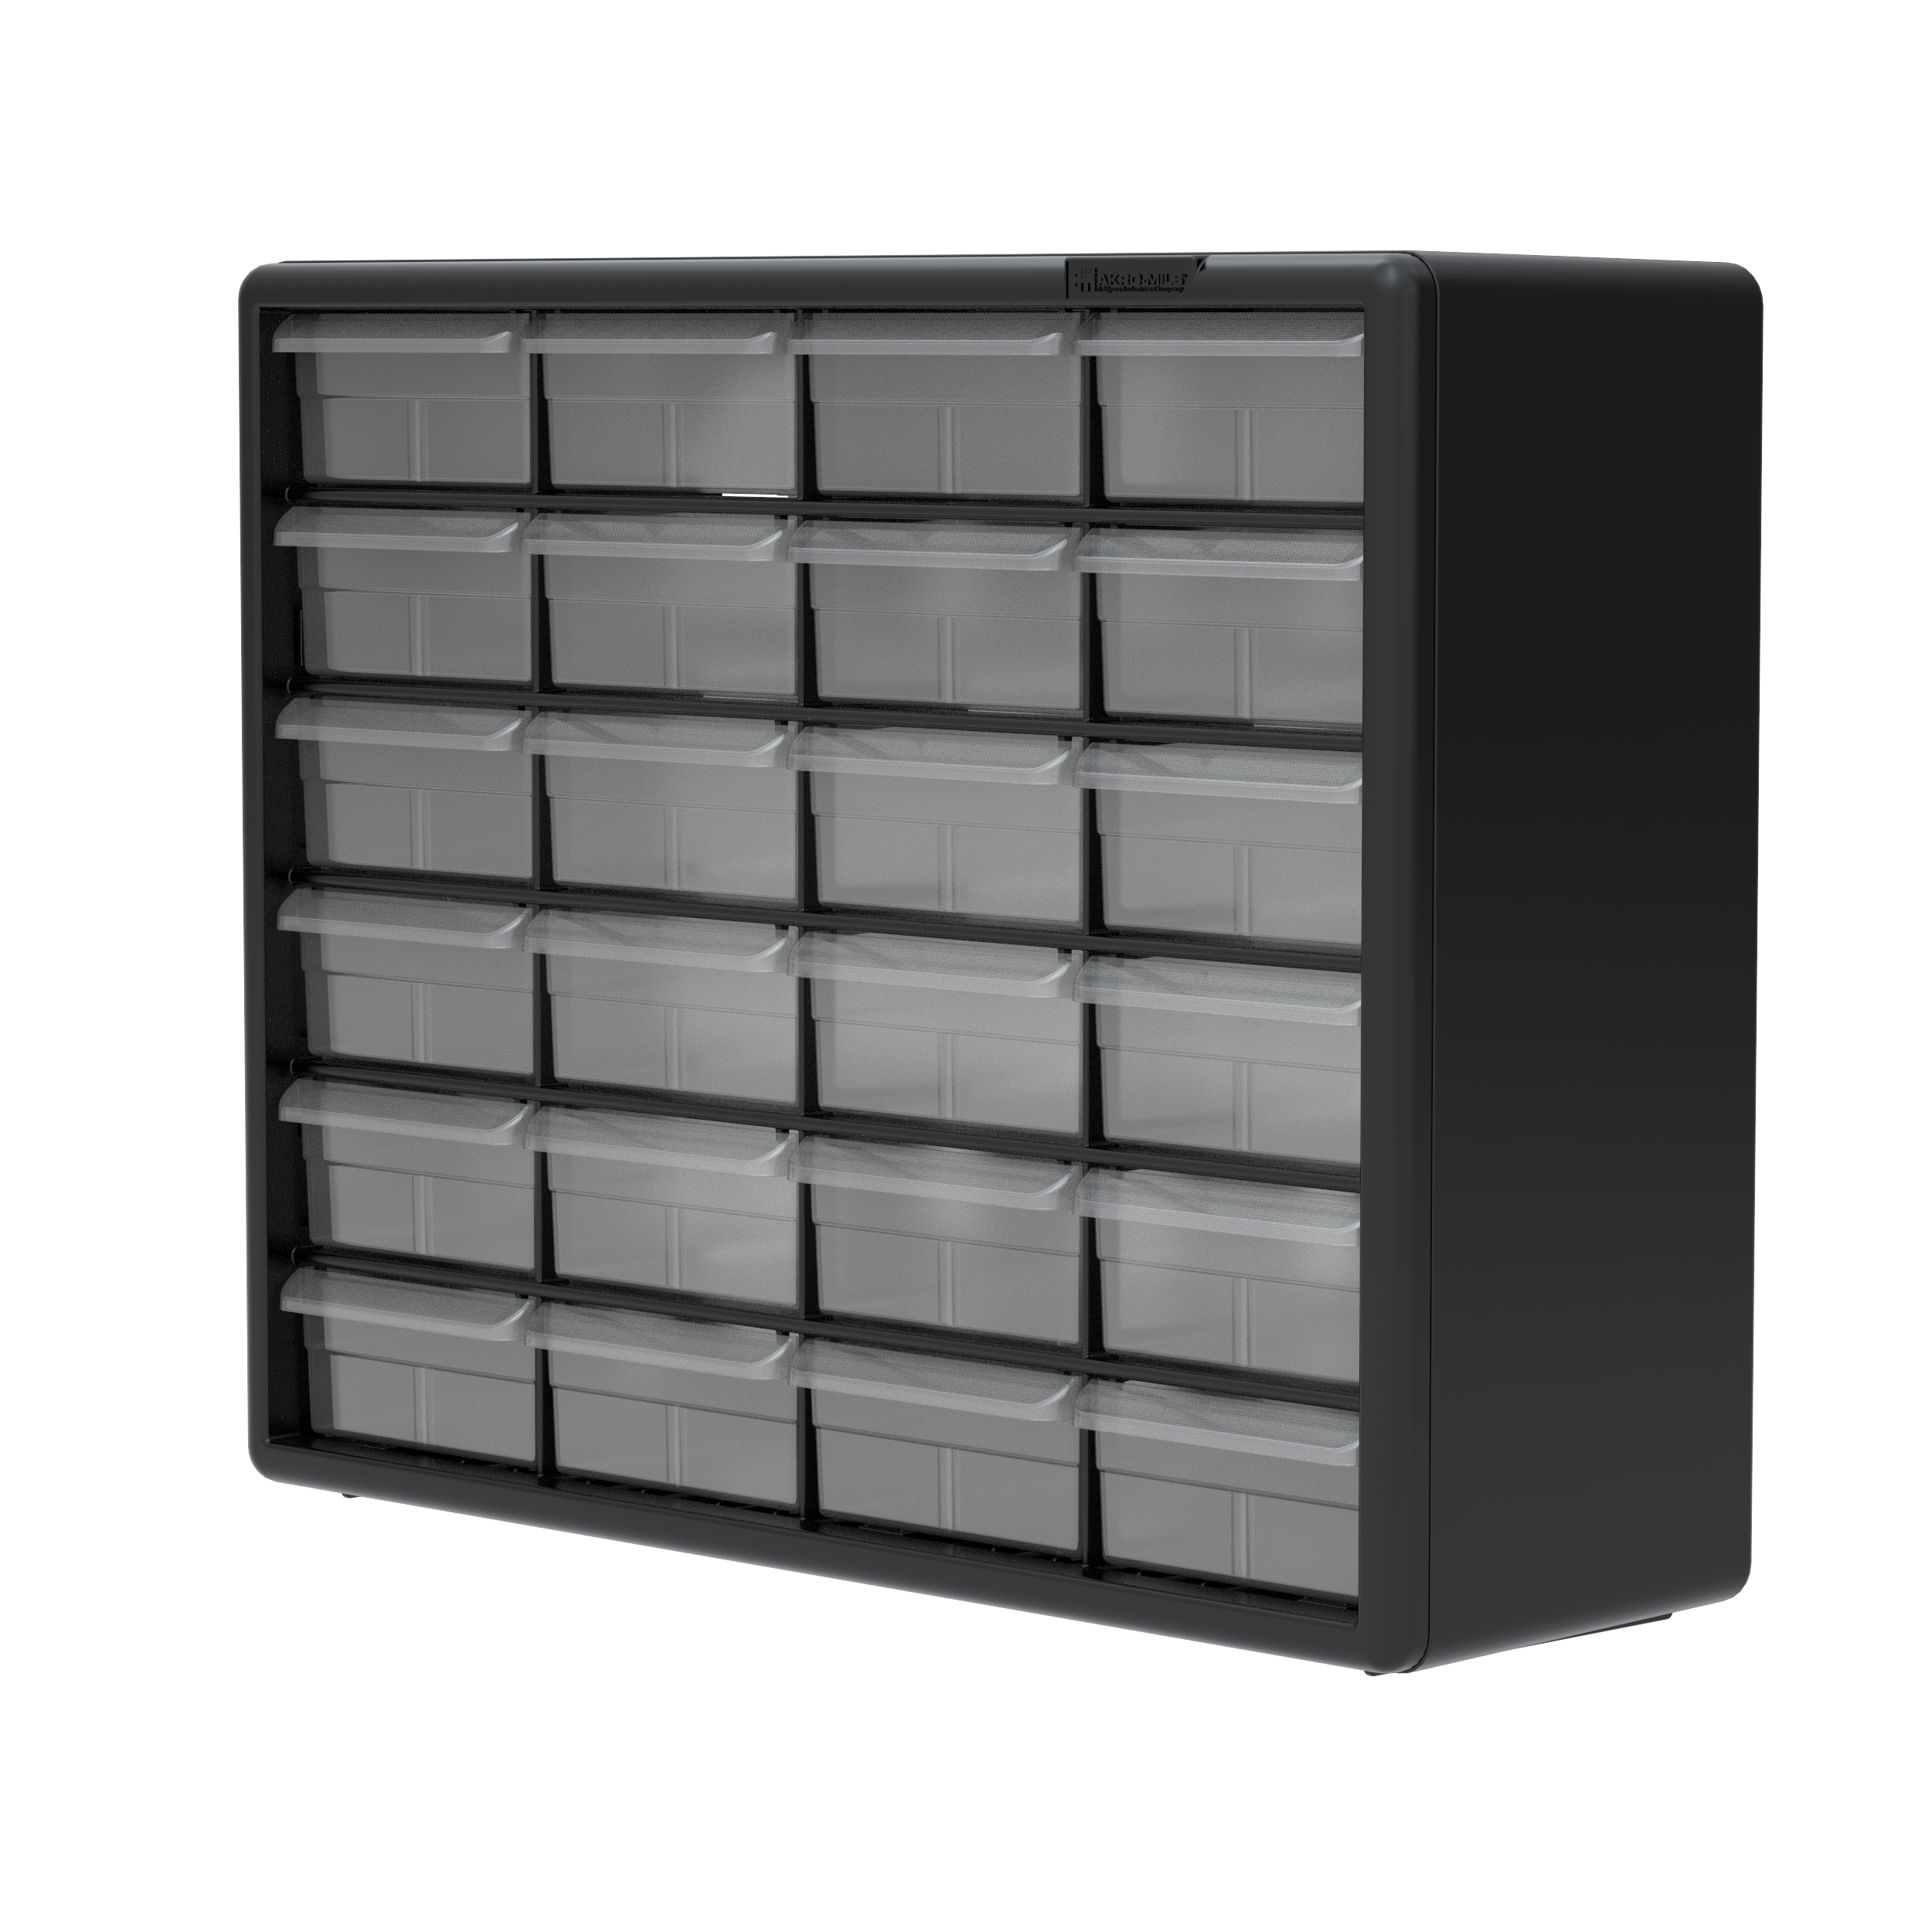 Akro-Mils 24 Drawer Plastic Storage Organizer with Drawers for Hardware,  Small Parts, Craft Supplies